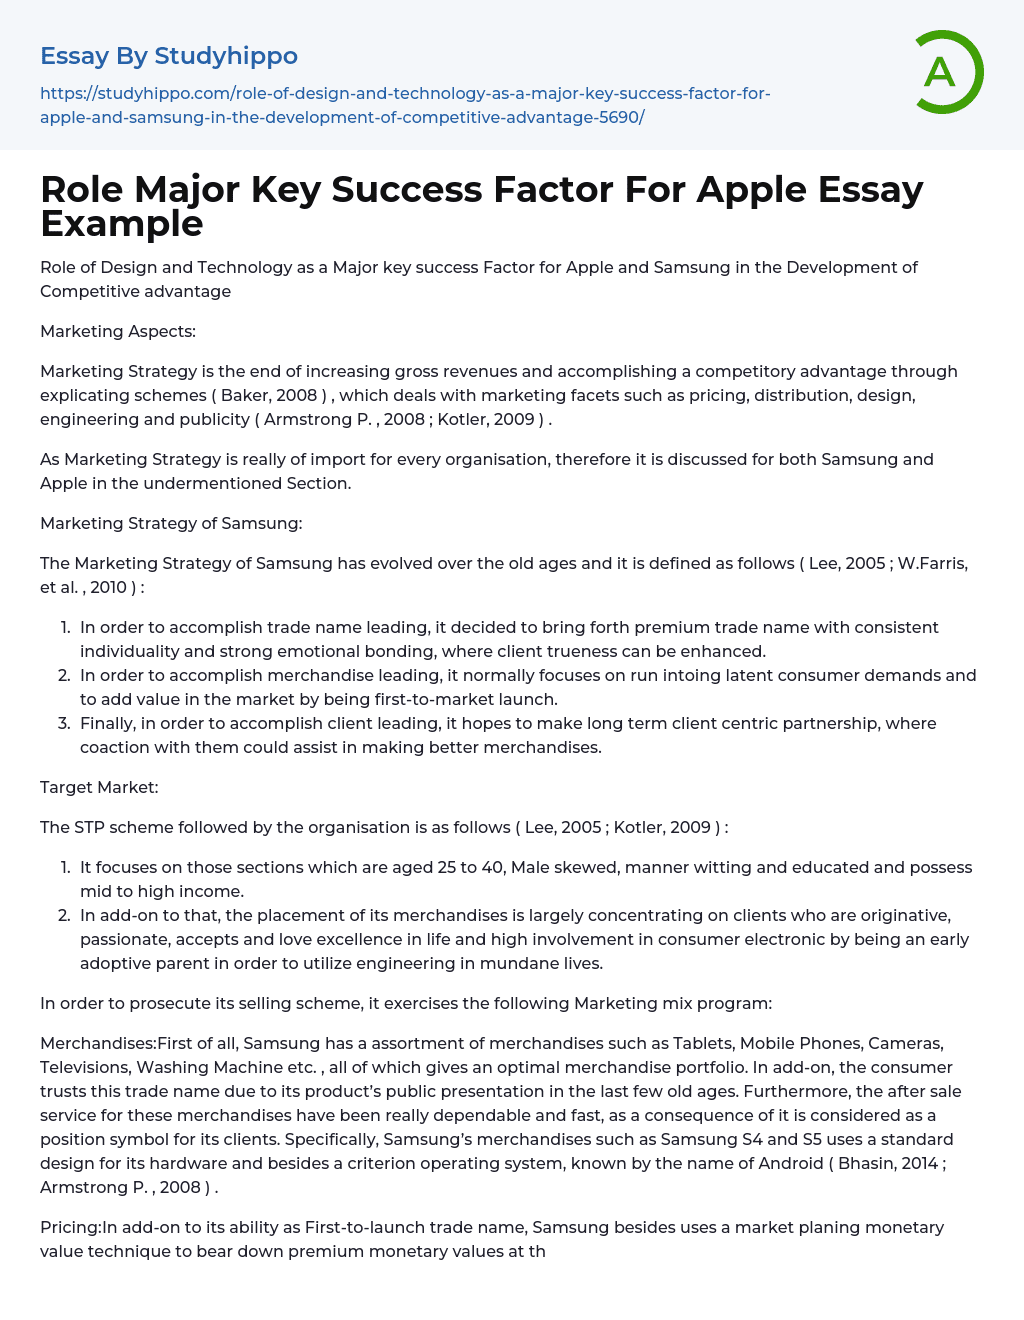 Role Major Key Success Factor For Apple Essay Example